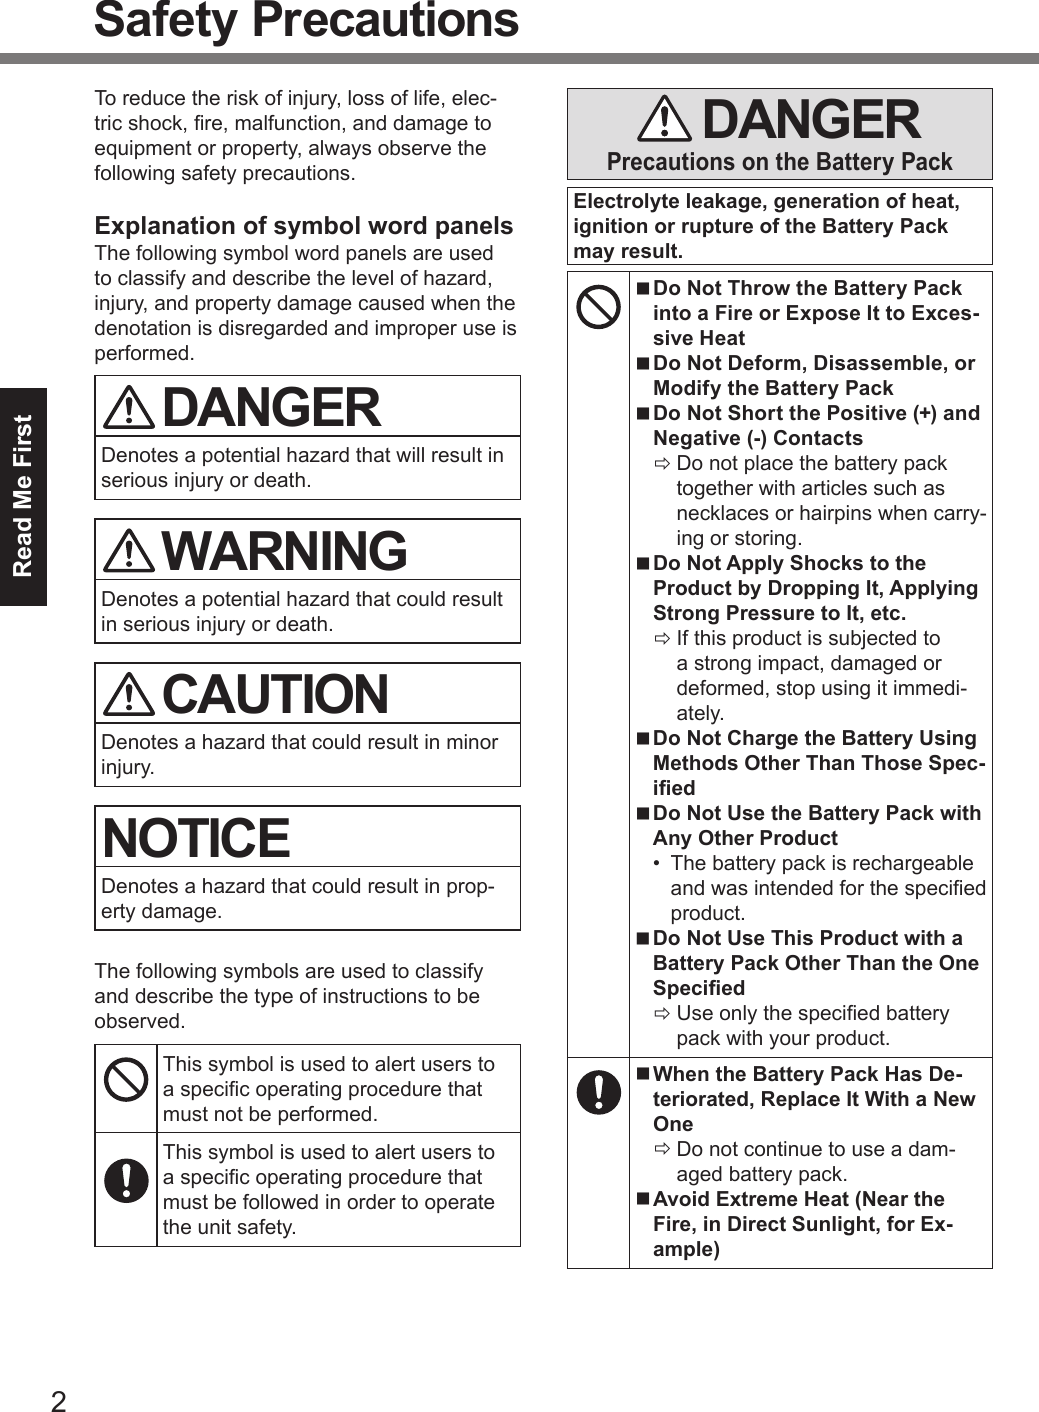 2Read Me FirstSafety PrecautionsTo reduce the risk of injury, loss of life, elec-tric shock, re, malfunction, and damage to equipment or property, always observe the following safety precautions.Explanation of symbol word panelsThe following symbol word panels are used to classify and describe the level of hazard, injury, and property damage caused when the denotation is disregarded and improper use is performed. DANGERDenotes a potential hazard that will result in serious injury or death. WARNINGDenotes a potential hazard that could result in serious injury or death. CAUTIONDenotes a hazard that could result in minor injury.NOTICEDenotes a hazard that could result in prop-erty damage.The following symbols are used to classify and describe the type of instructions to be observed.This symbol is used to alert users to a specic operating procedure that must not be performed.This symbol is used to alert users to a specic operating procedure that must be followed in order to operate the unit safety. DANGERPrecautions on the Battery PackElectrolyte leakage, generation of heat, ignition or rupture of the Battery Pack may result. nDo Not Throw the Battery Pack into a Fire or Expose It to Exces-sive Heat nDo Not Deform, Disassemble, or Modify the Battery Pack nDo Not Short the Positive (+) and Negative (-) Contacts ÖDo not place the battery pack together with articles such as necklaces or hairpins when carry-ing or storing. nDo Not Apply Shocks to the Product by Dropping It, Applying Strong Pressure to It, etc. ÖIf this product is subjected to a strong impact, damaged or deformed, stop using it immedi-ately. nDo Not Charge the Battery Using Methods Other Than Those Spec-ied nDo Not Use the Battery Pack with Any Other Product•  The battery pack is rechargeable and was intended for the specied product. nDo Not Use This Product with a Battery Pack Other Than the One Specied ÖUse only the specied battery pack with your product. nWhen the Battery Pack Has De-teriorated, Replace It With a New One ÖDo not continue to use a dam-aged battery pack. nAvoid Extreme Heat (Near the Fire, in Direct Sunlight, for Ex-ample)